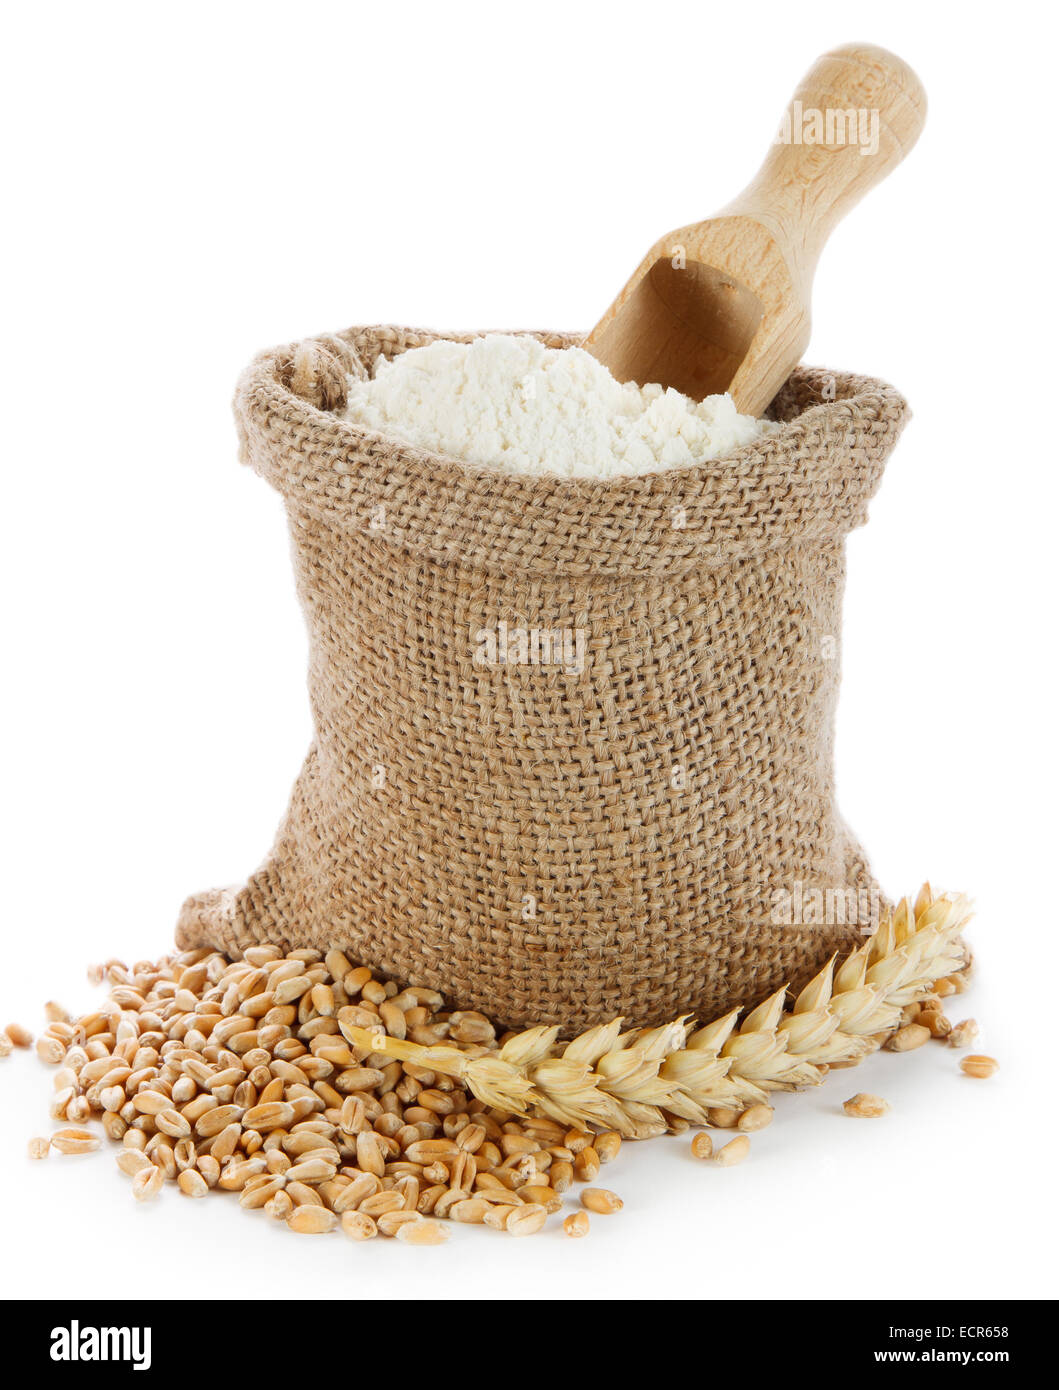 Wheat seed and flour in small burlap sack Stock Photo